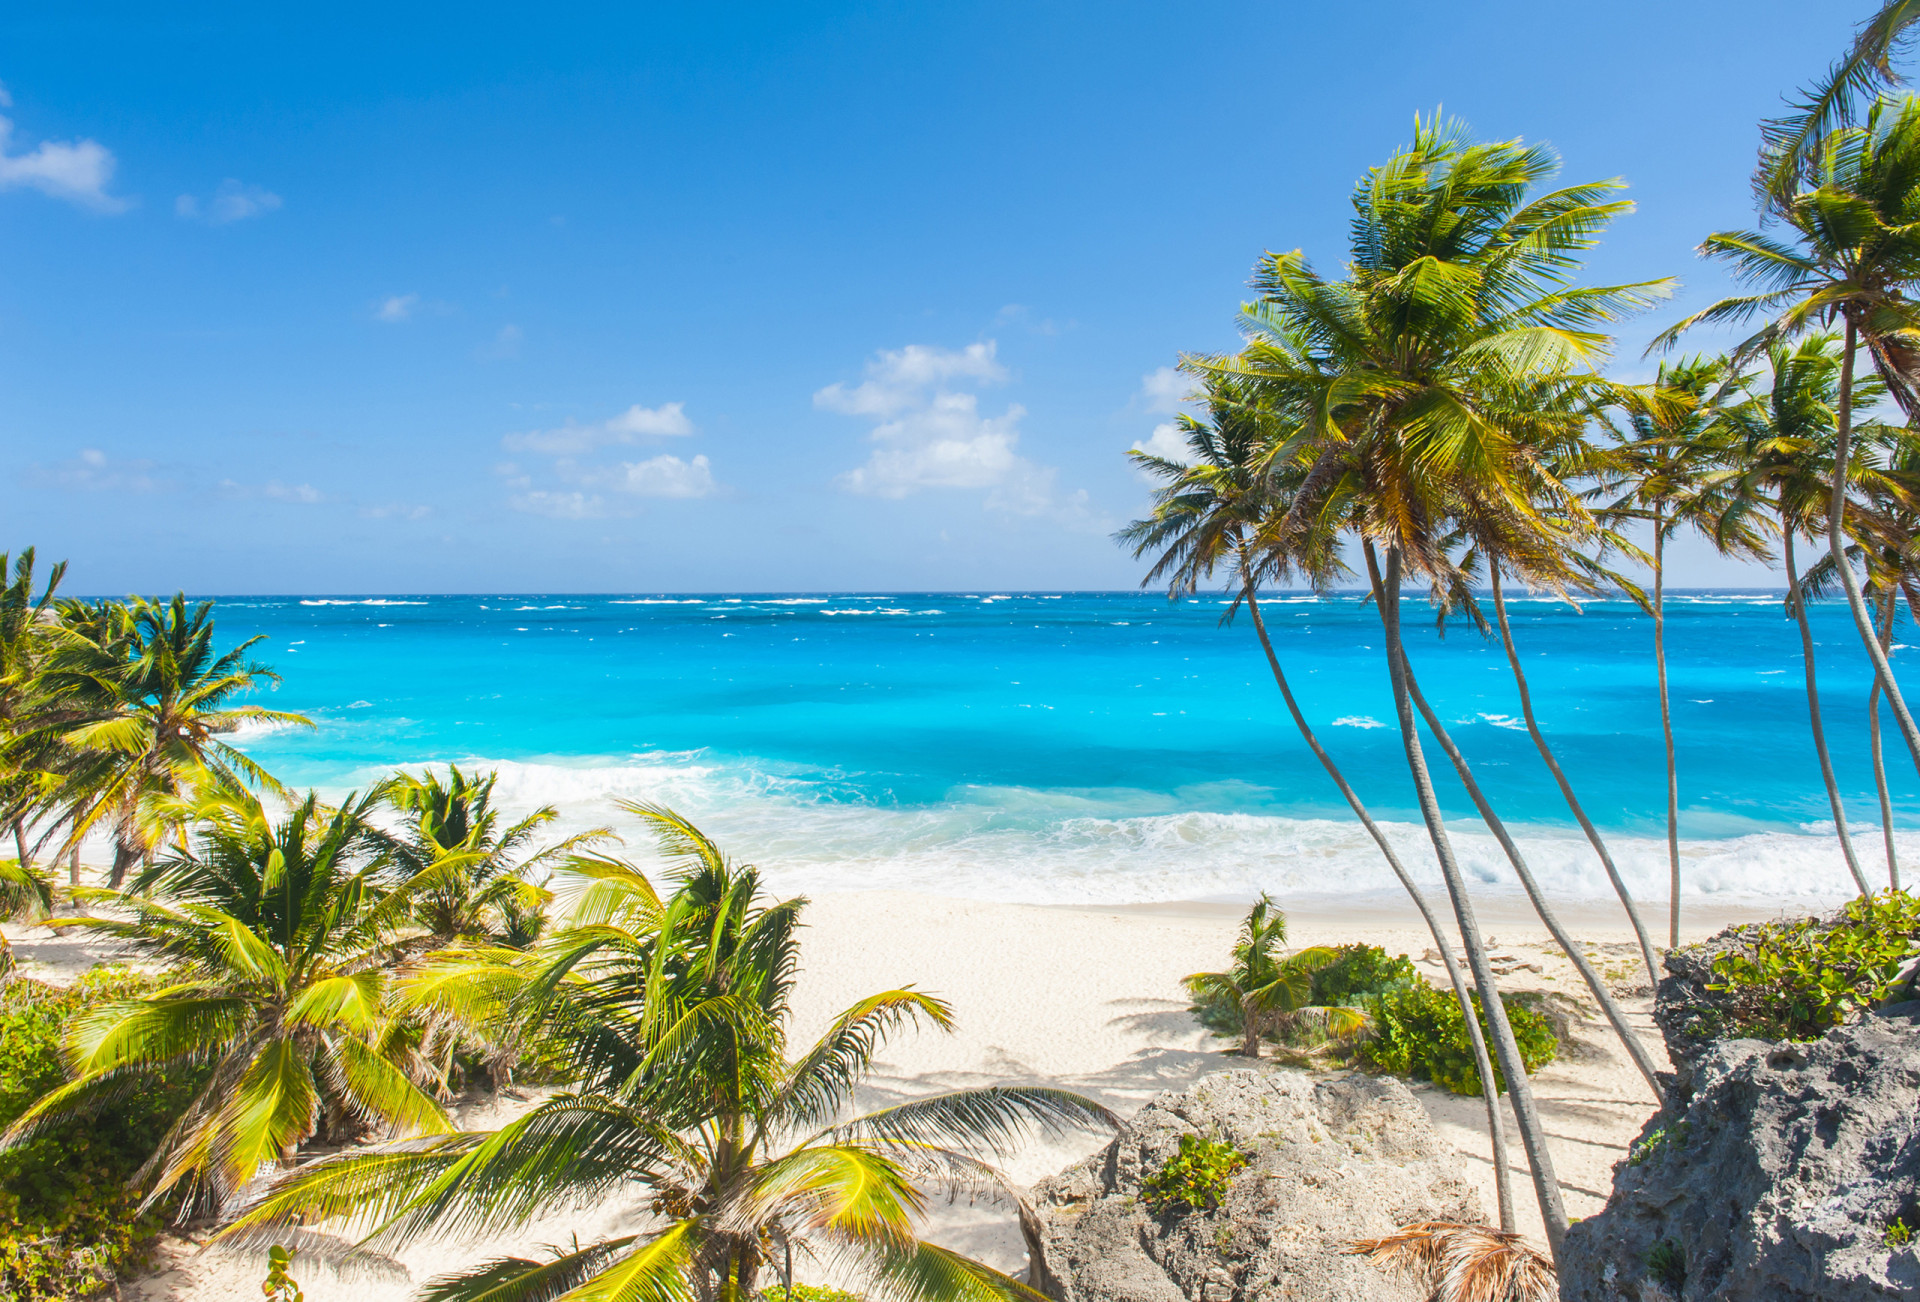 <p>Most of the Caribbean islands charge a tourist tax. The price ranges depending on the island.</p><p><a href="https://www.msn.com/en-ph/community/channel/vid-7xx8mnucu55yw63we9va2gwr7uihbxwc68fxqp25x6tg4ftibpra?cvid=94631541bc0f4f89bfd59158d696ad7e">Follow us and access great exclusive content every day</a></p>